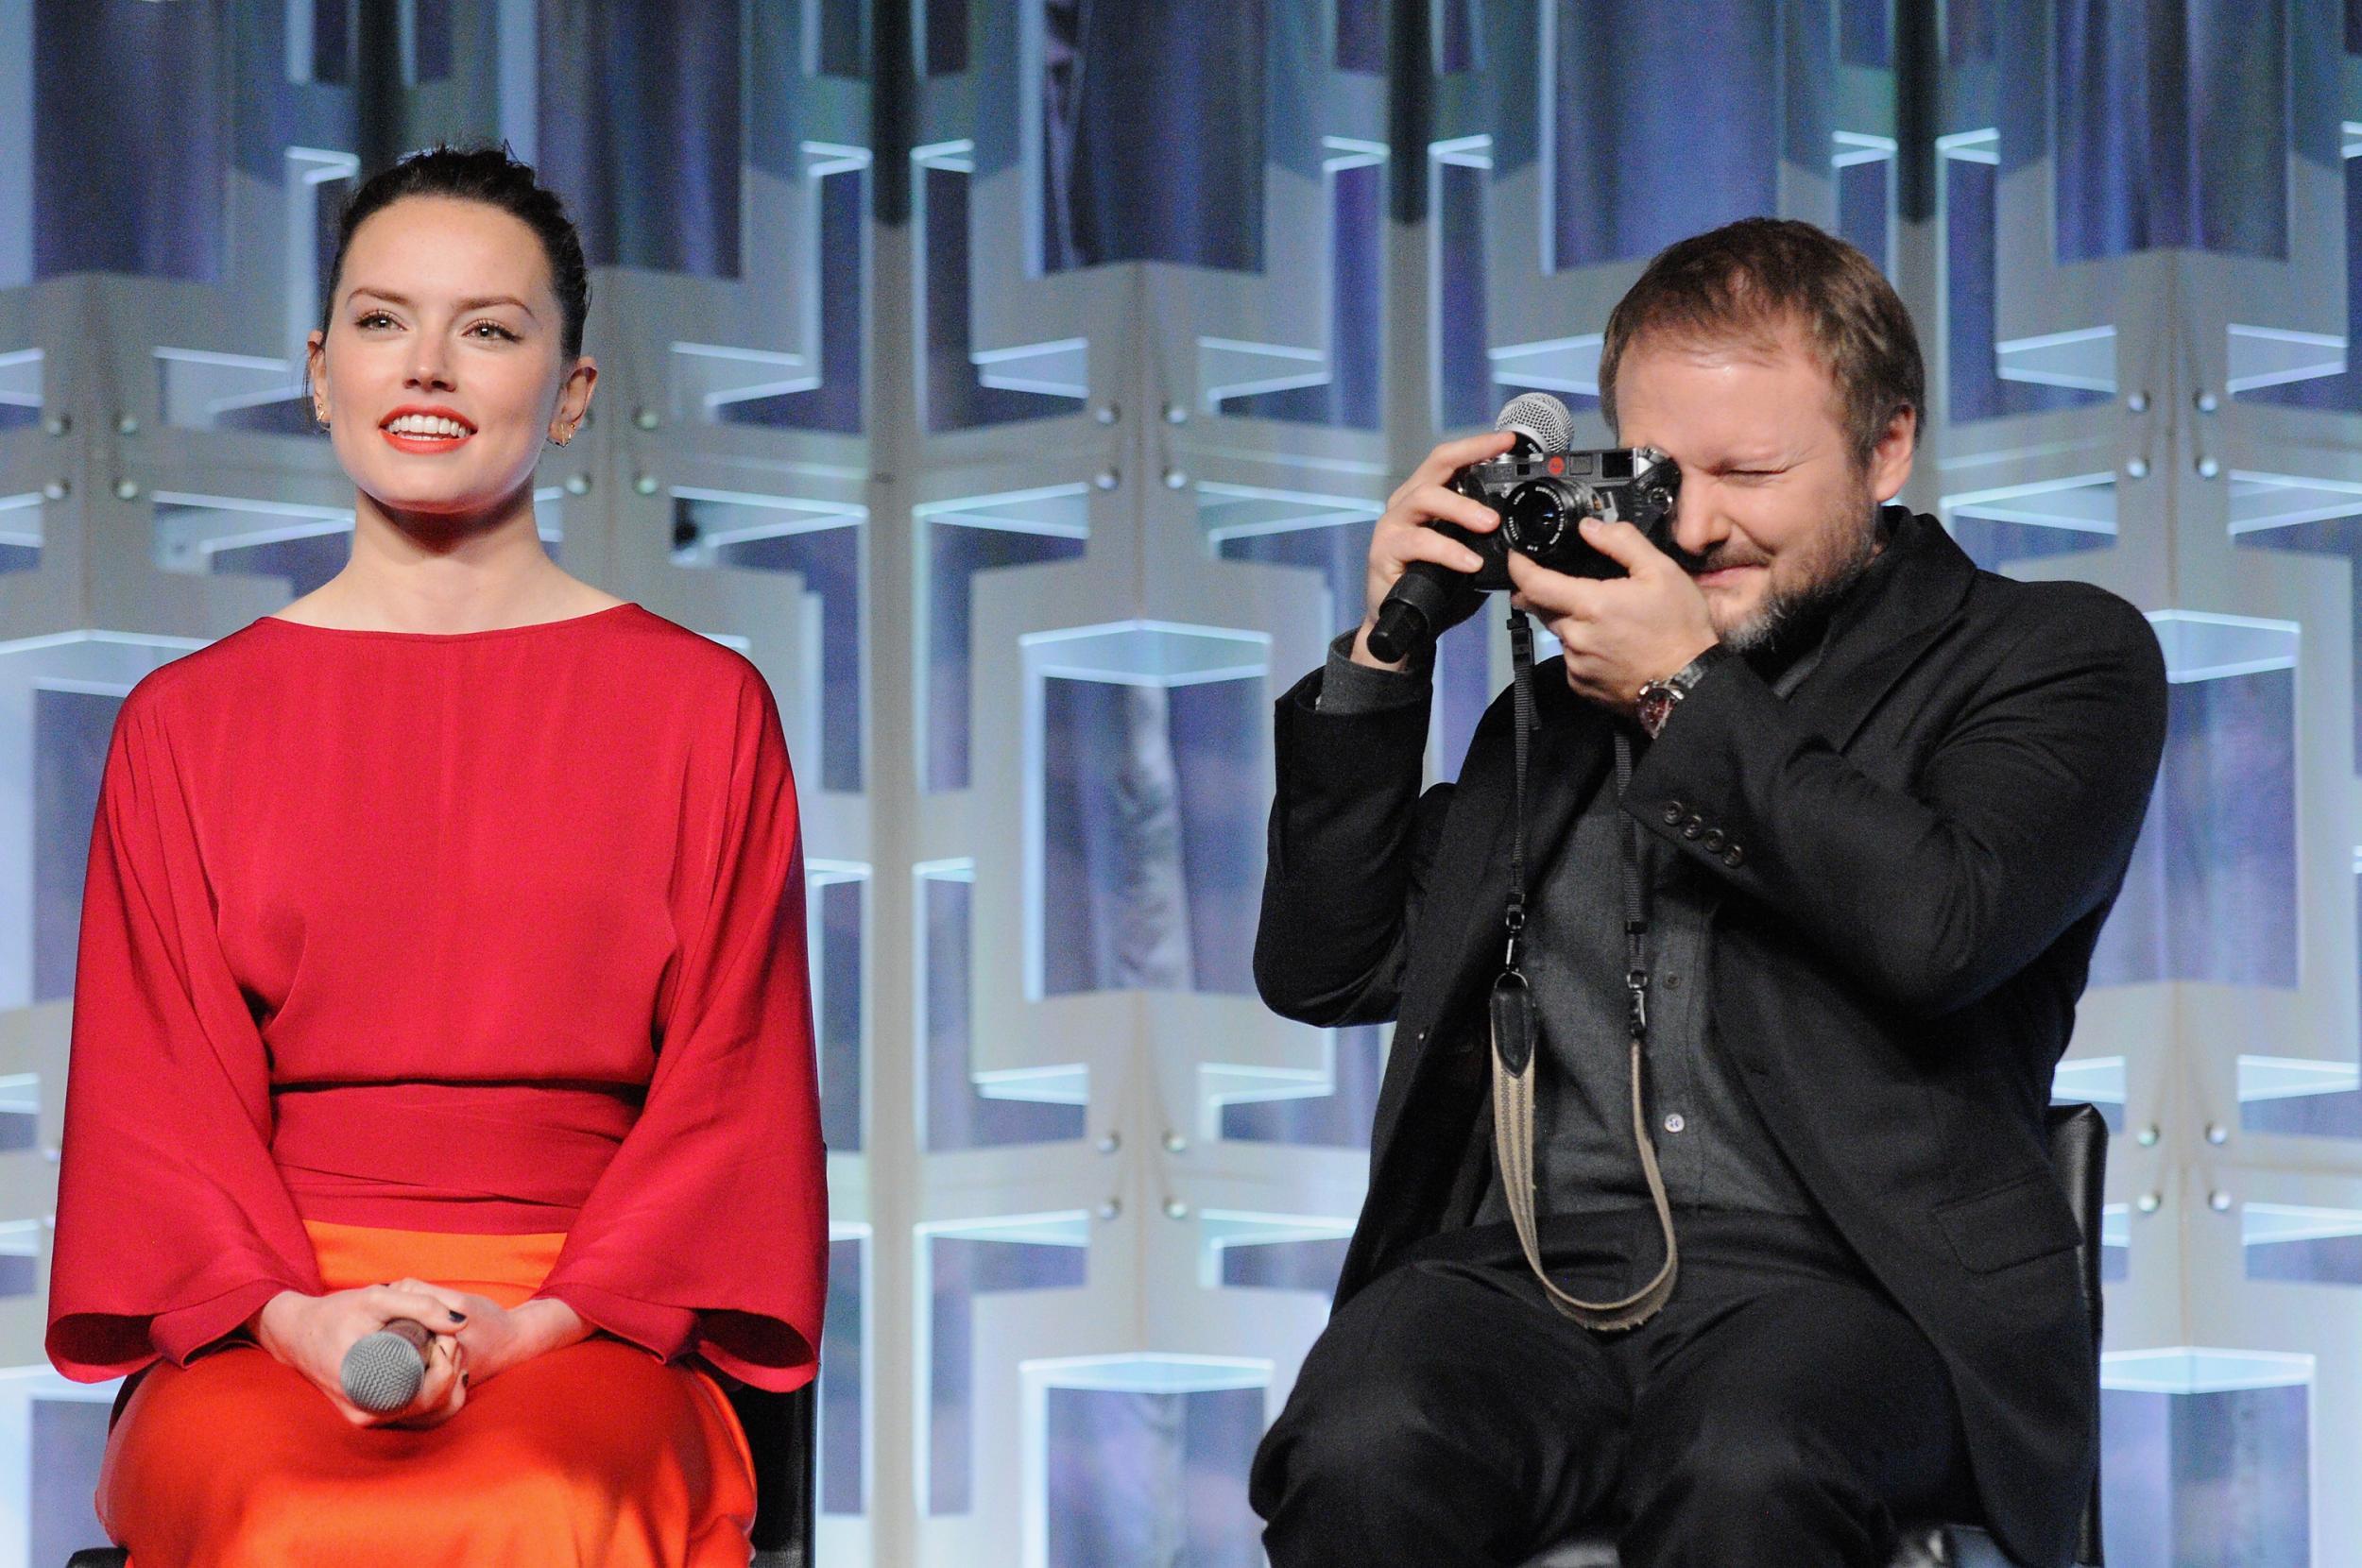 Daisy Ridley and director Rian Johnson attend the Star Wars: The Last Jedi panel at Star Wars Celebration 2017